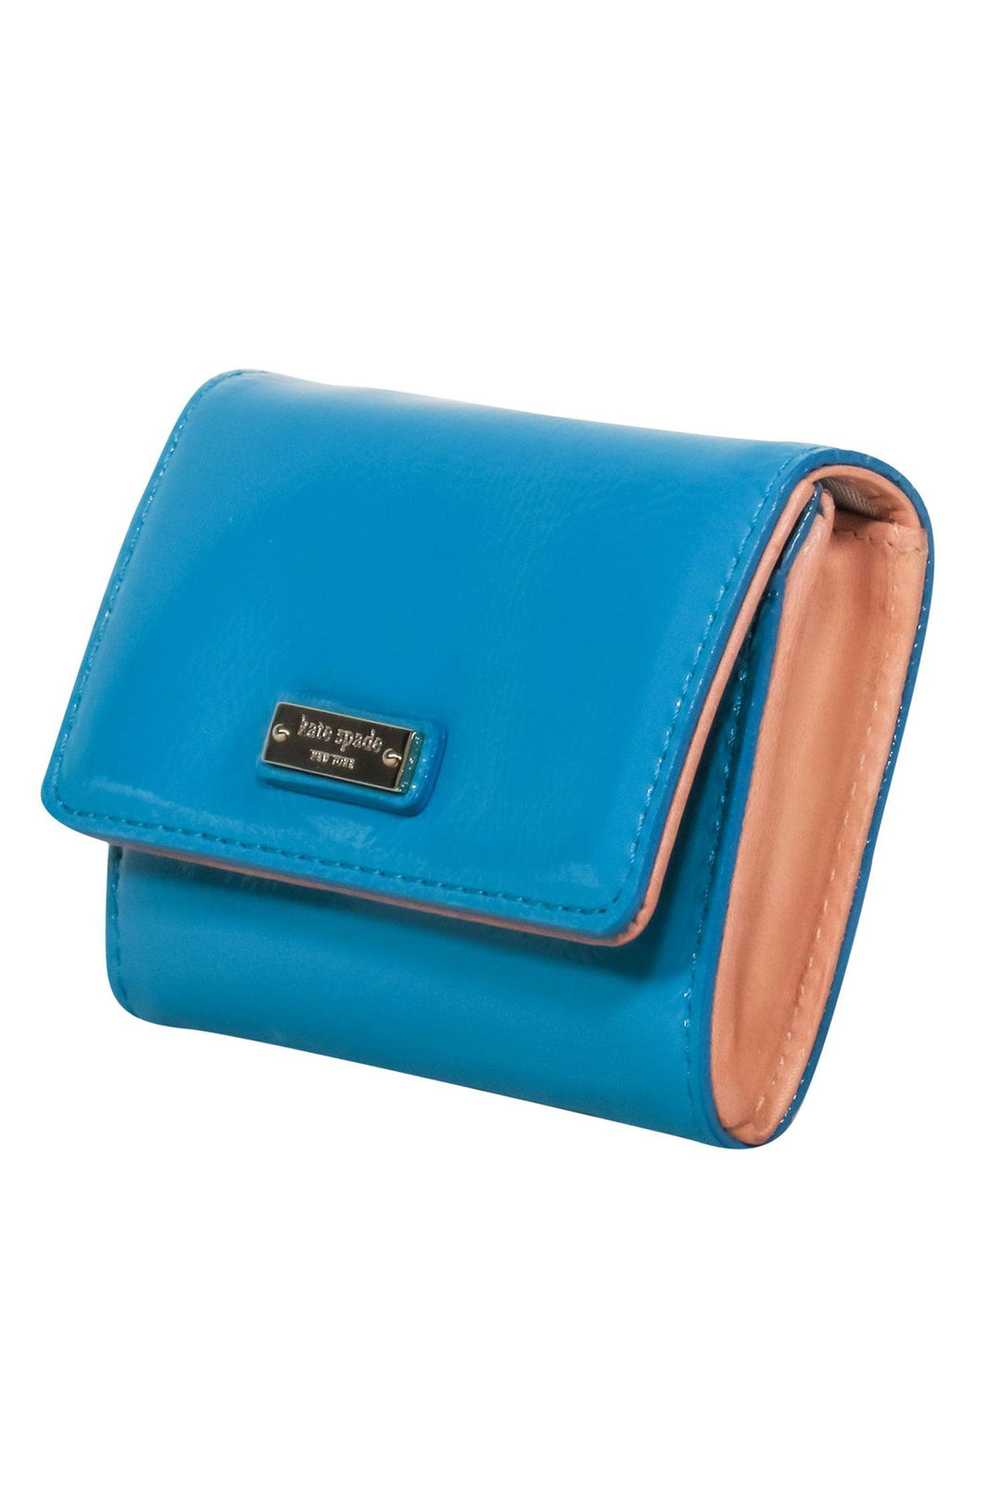 Kate Spade - Mini Teal Patent Leather Wallet - image 2